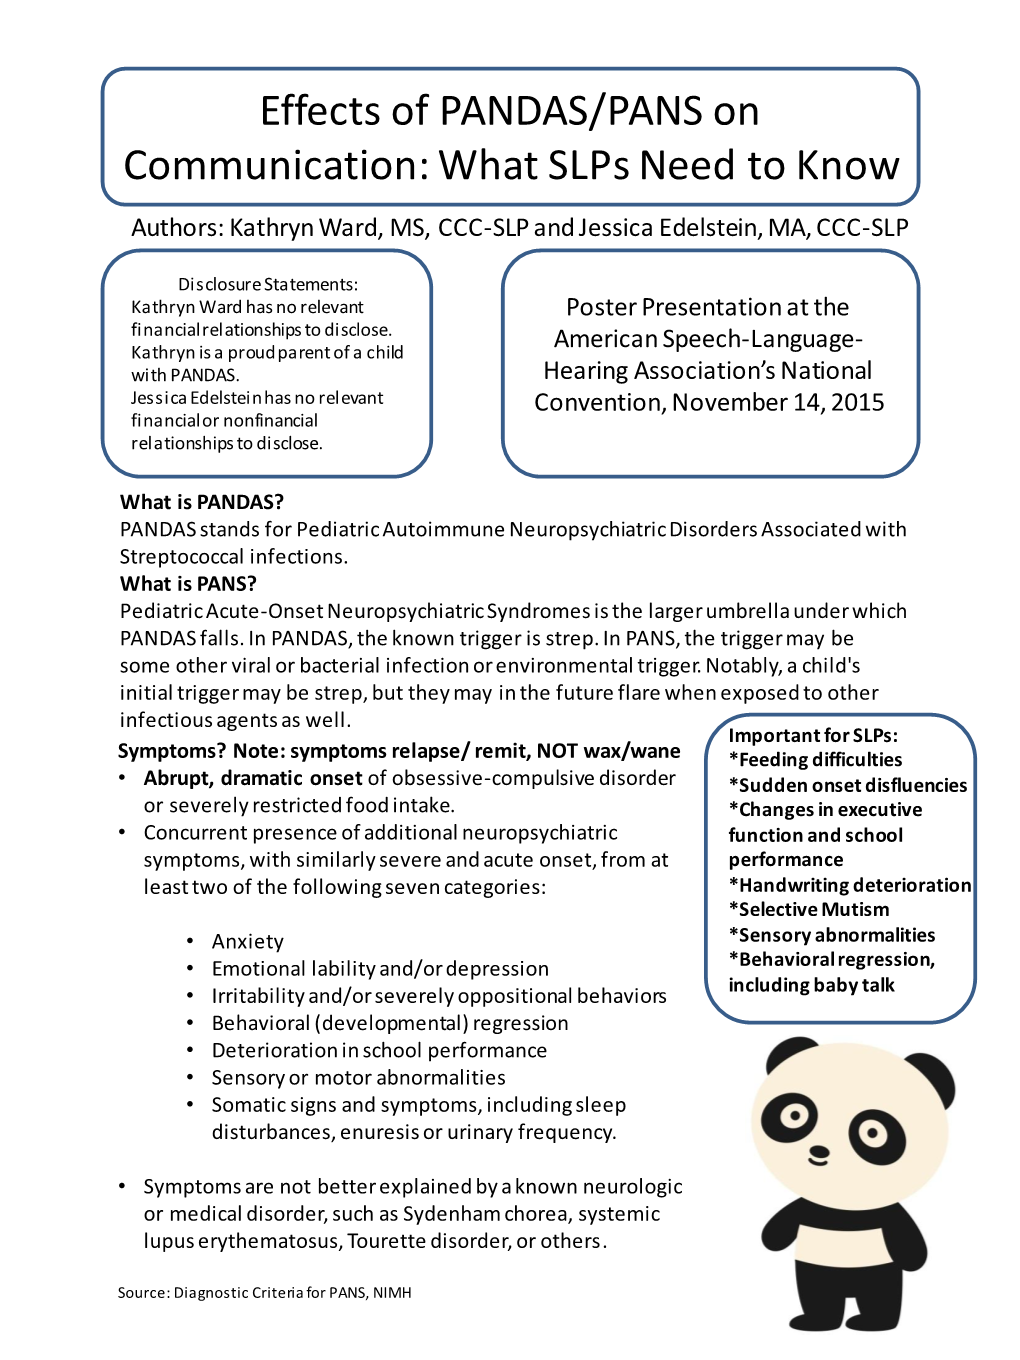 Effects of PANDAS/PANS on Communication: What Slps Need to Know Authors: Kathryn Ward, MS, CCC-SLP and Jessica Edelstein, MA, CCC-SLP